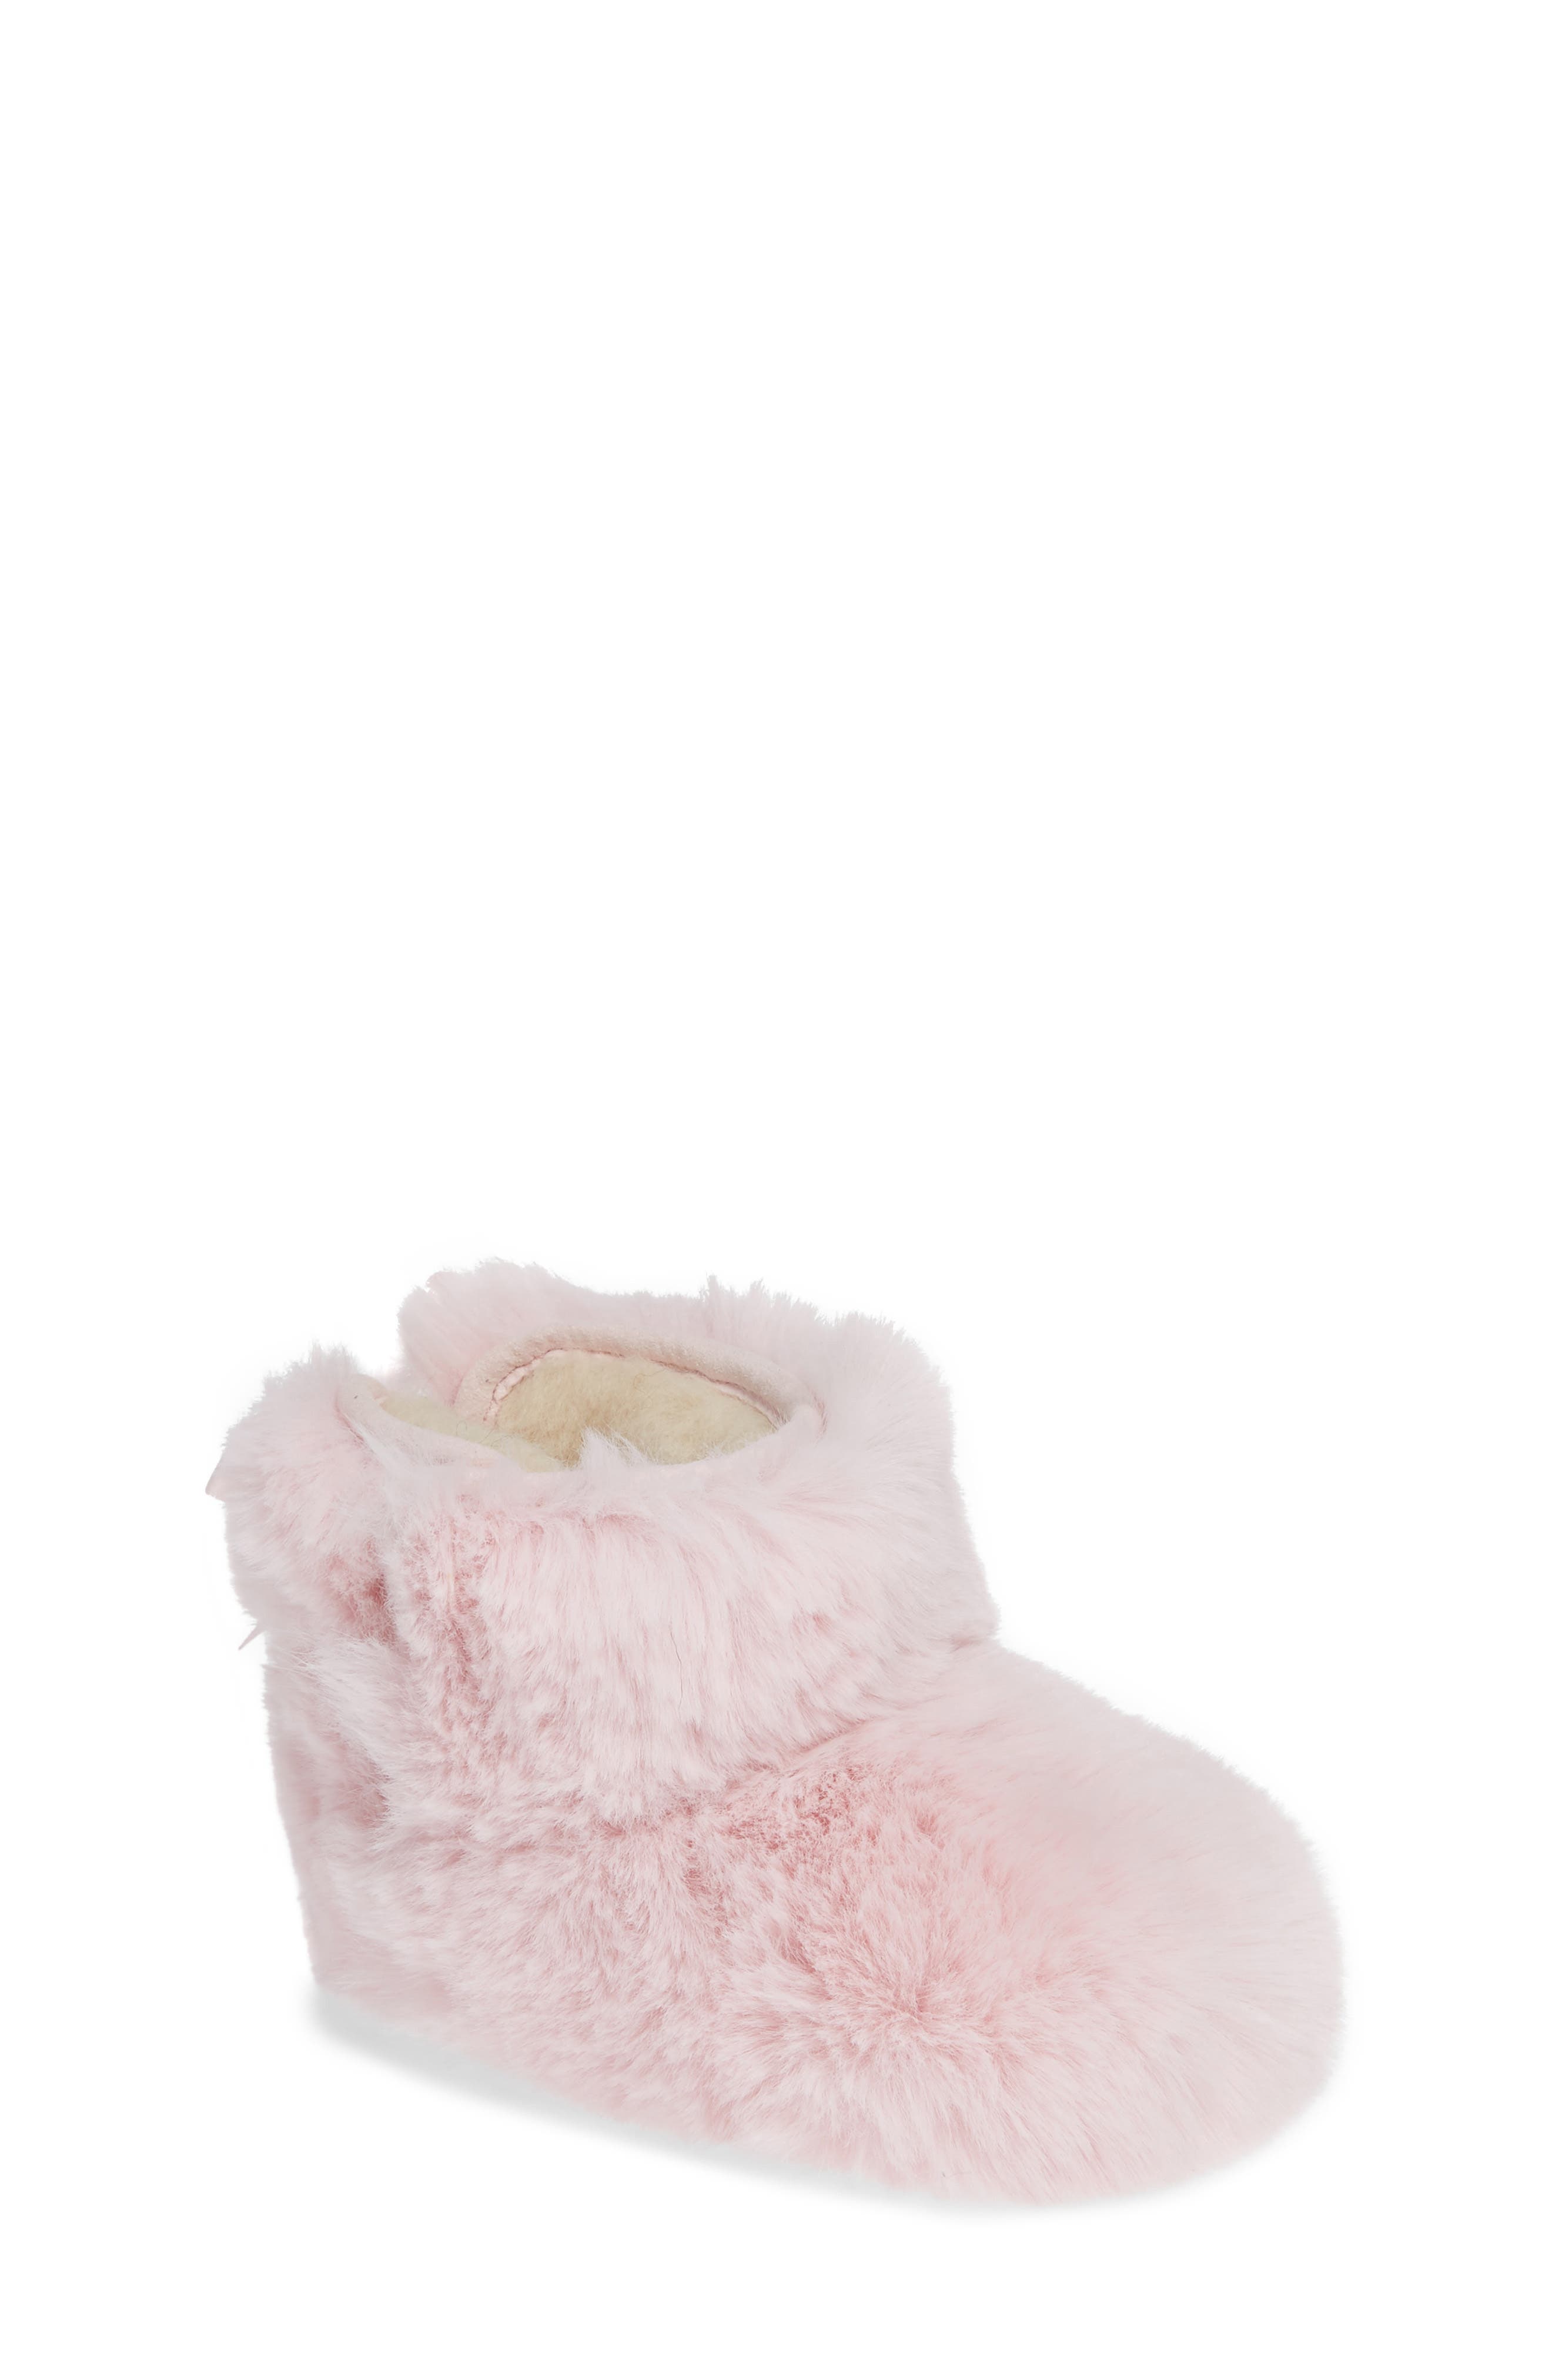 nordstrom uggs for toddlers